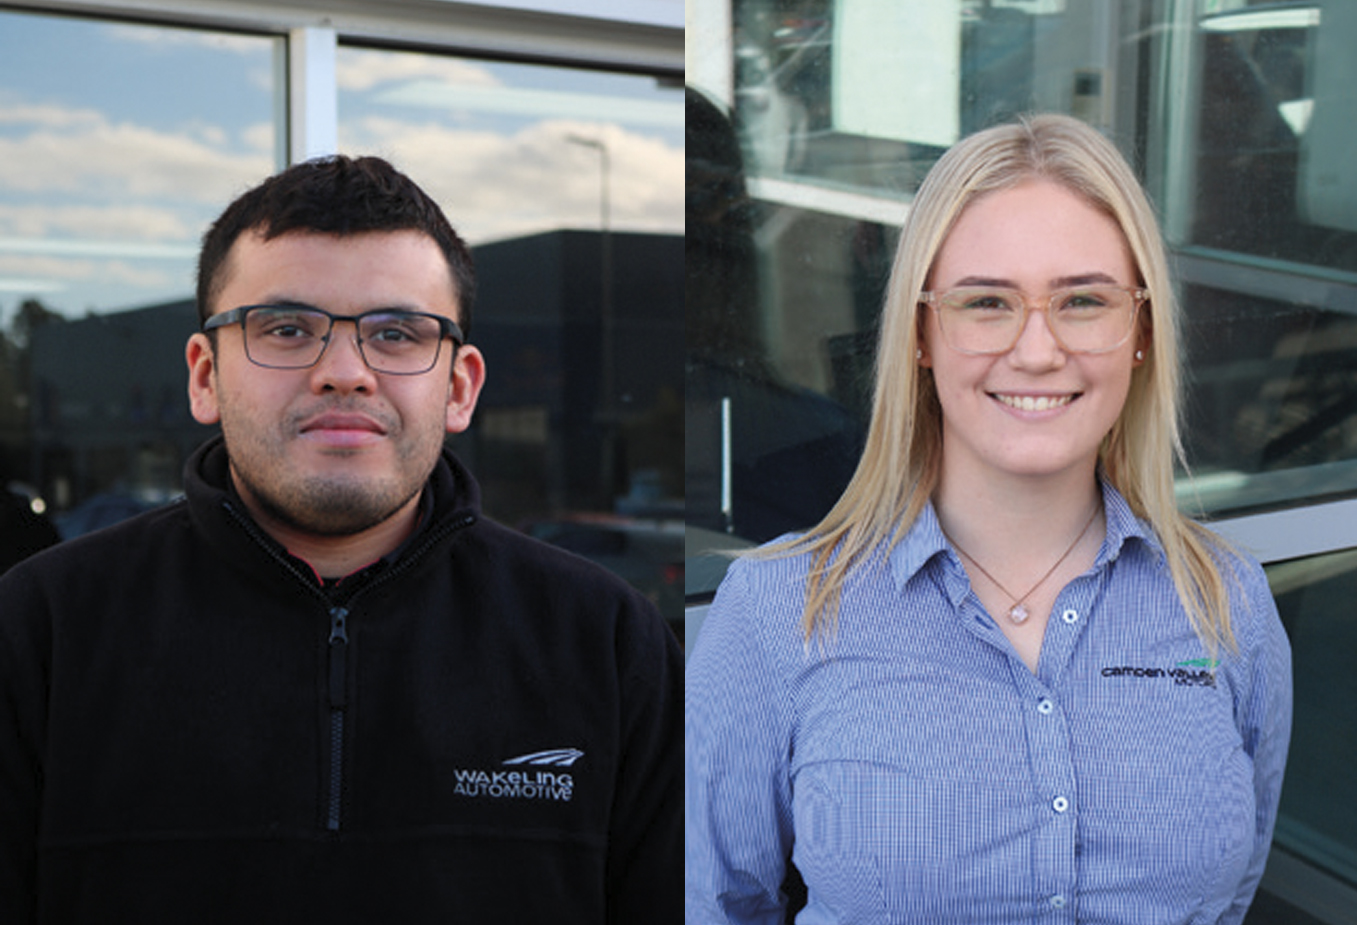 Our October Employees of the Month are...